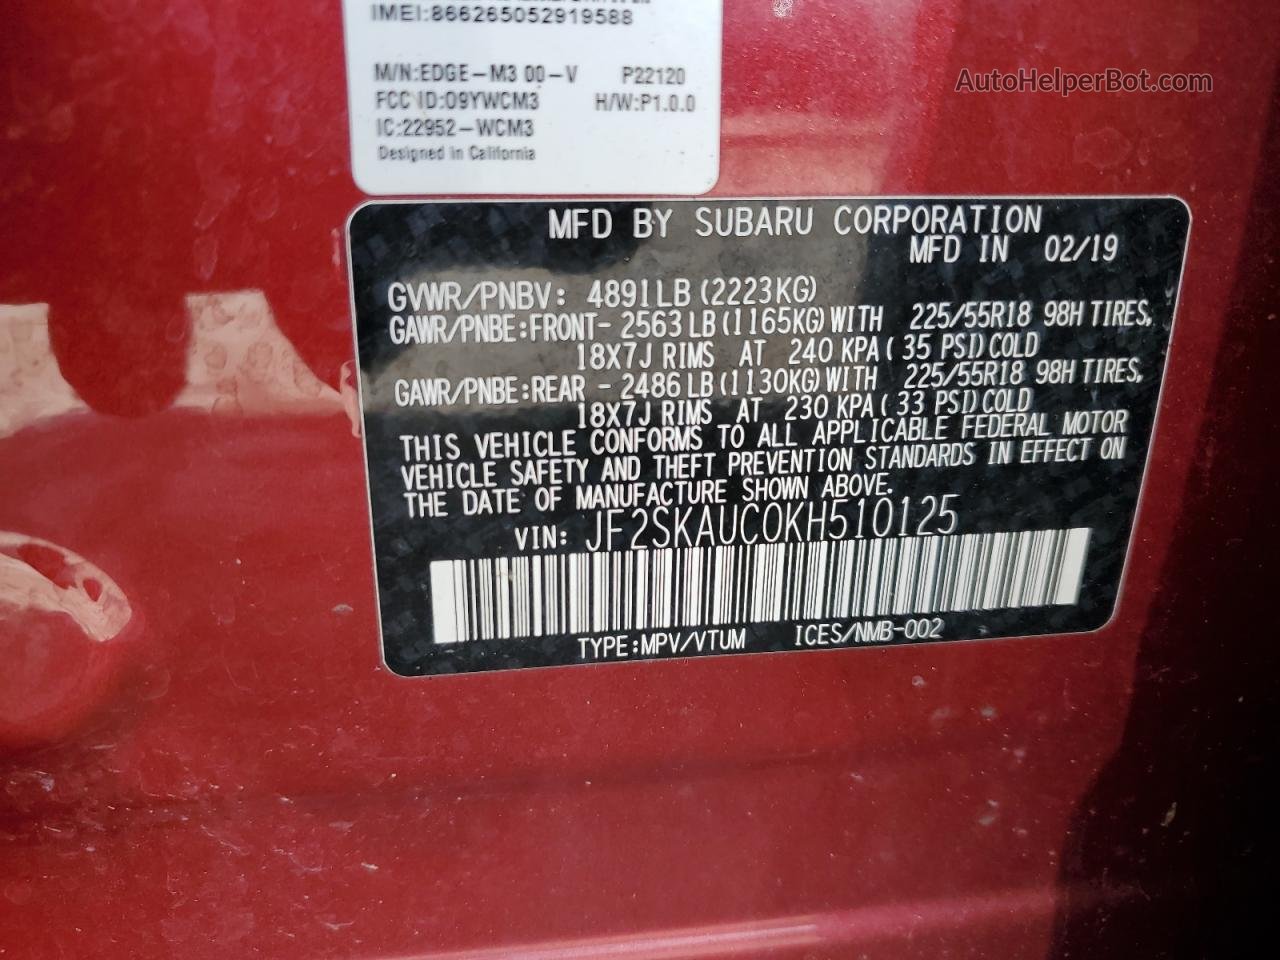 2019 Subaru Forester Limited Red vin: JF2SKAUC0KH510125